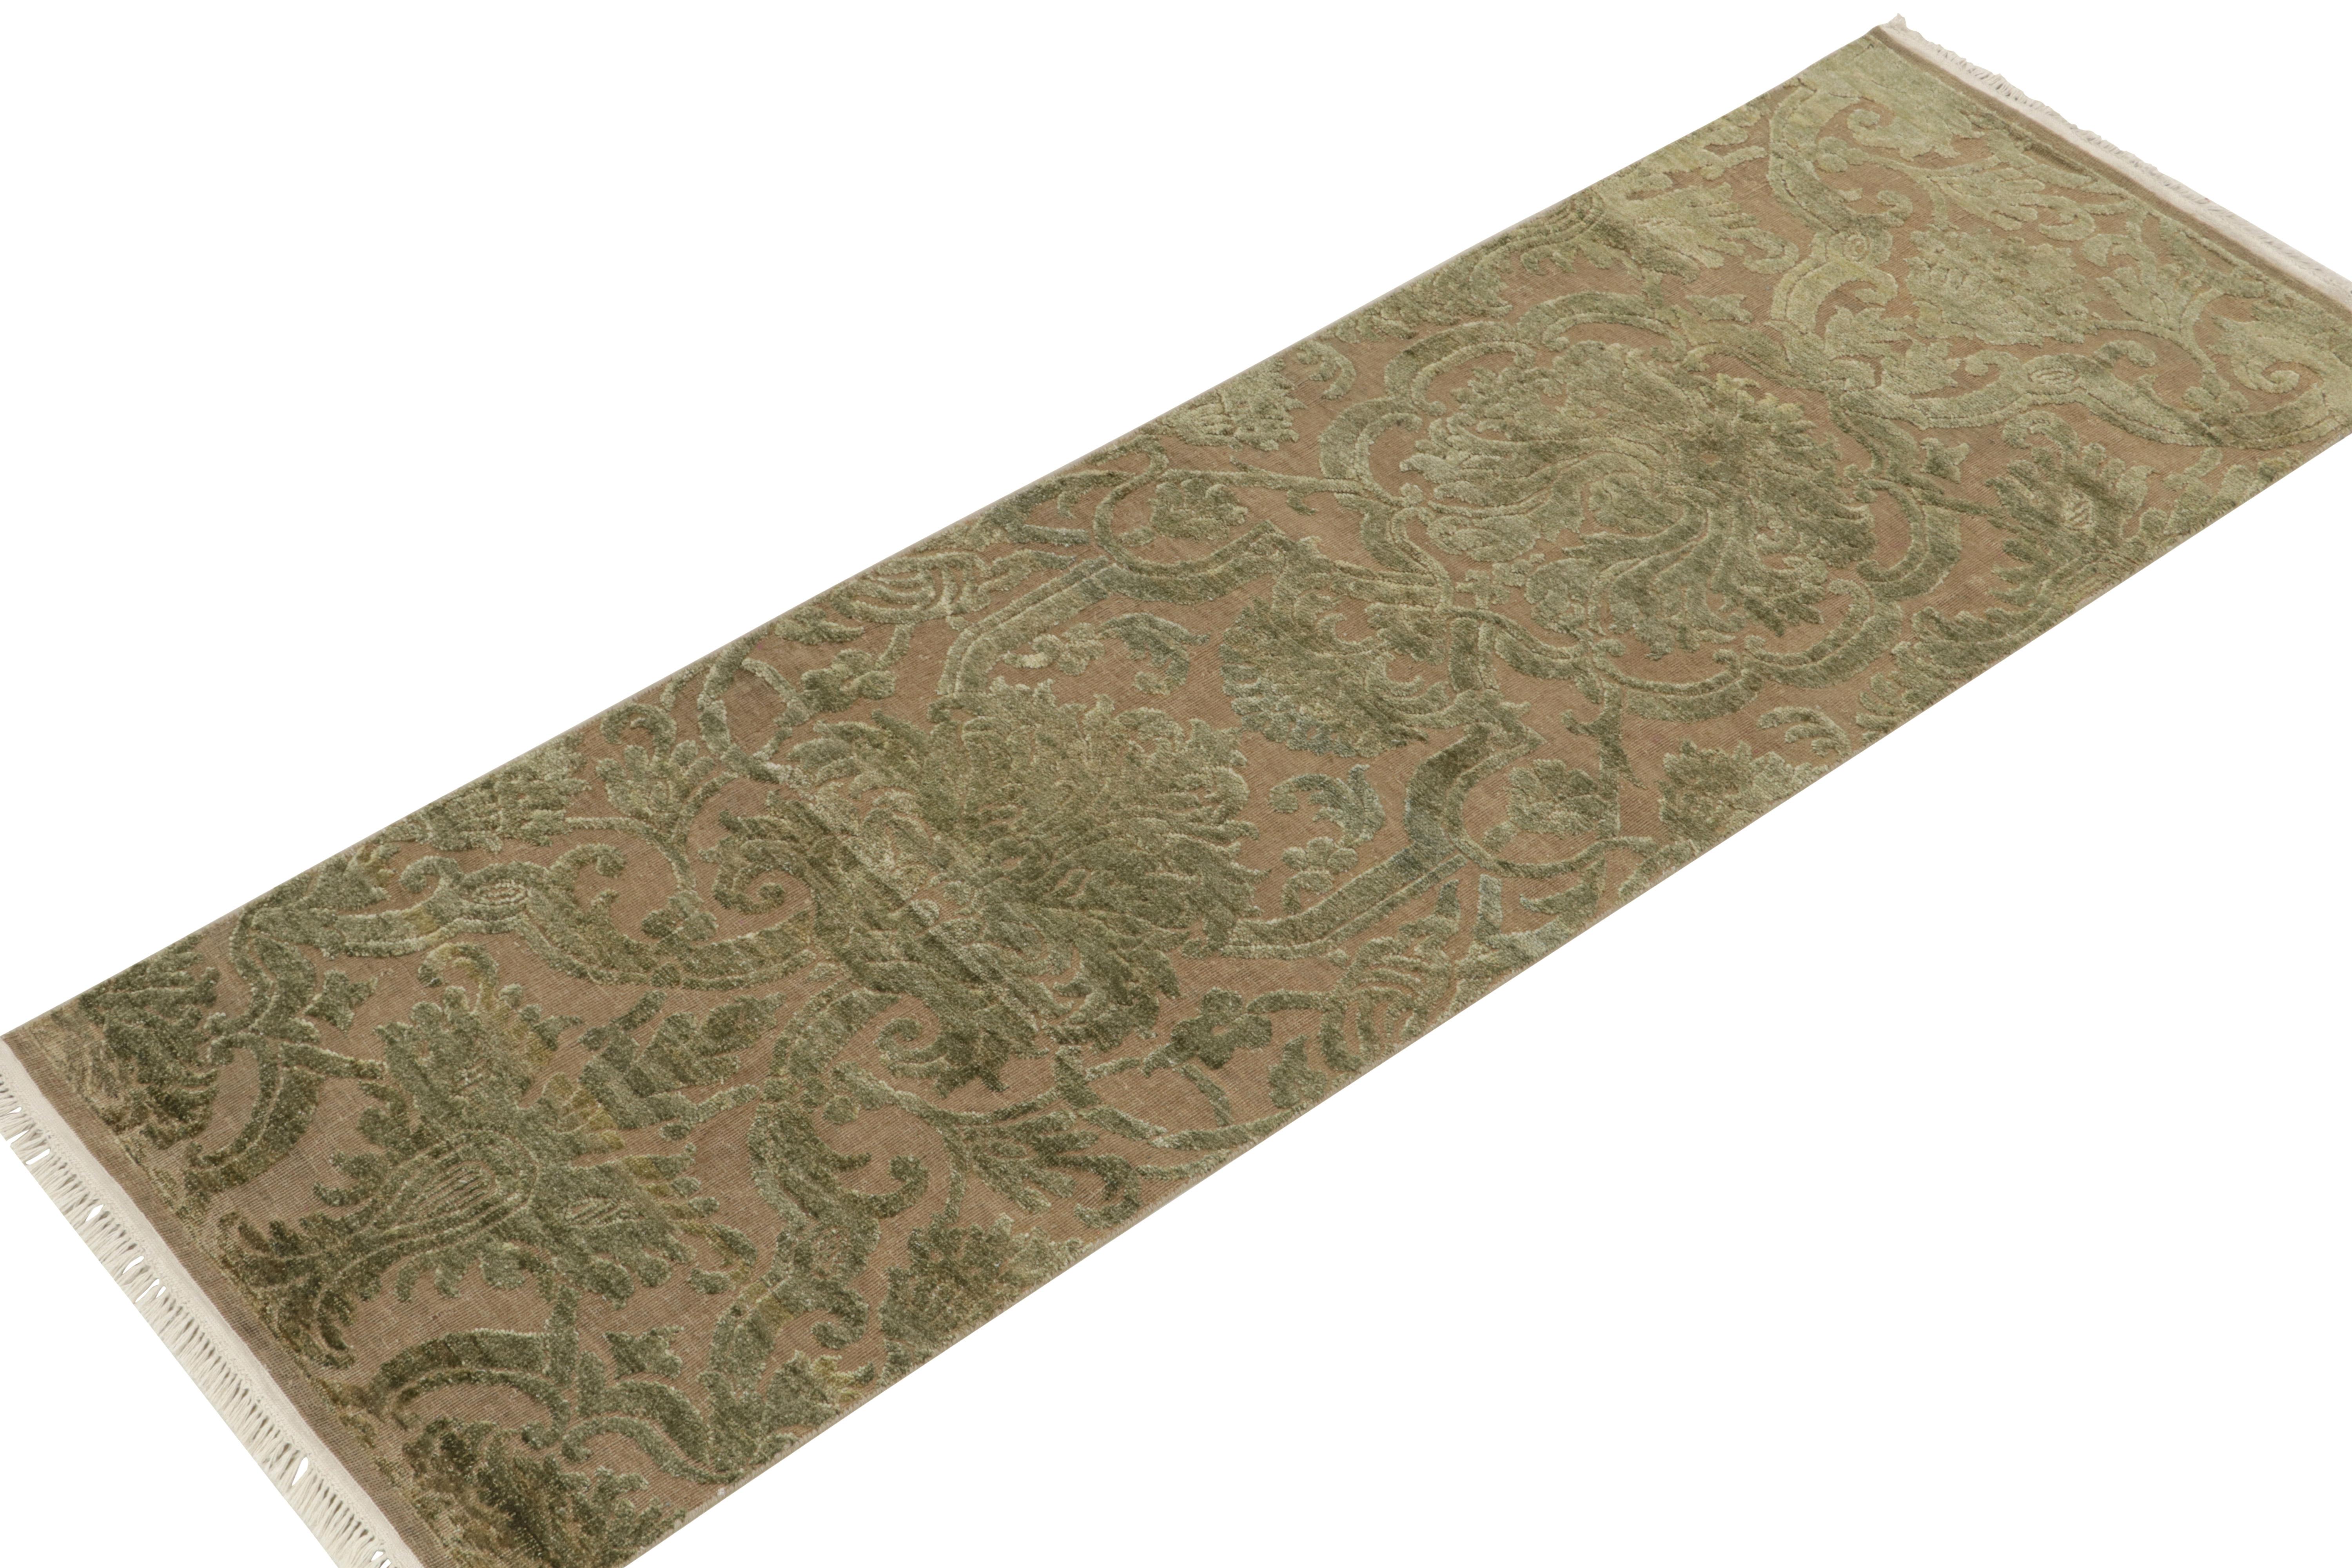 Indian Rug & Kilim’s European Style Twin Runners in Beige with Green Floral Patterns For Sale